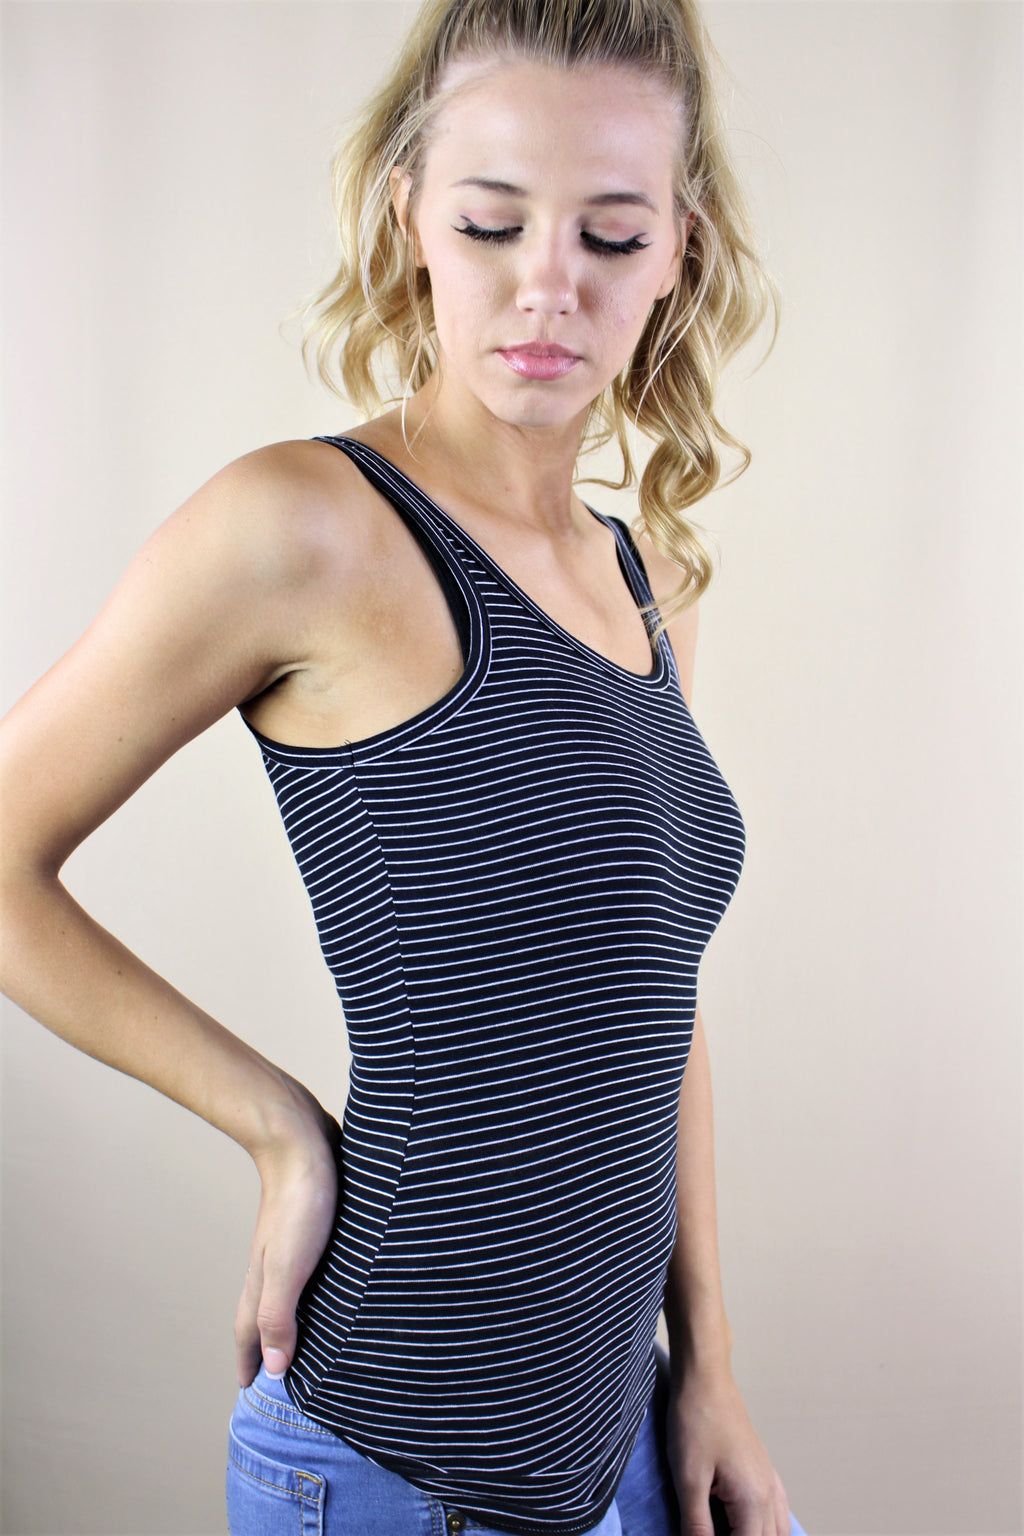 Women's Sleeveless Fitted Tank Top